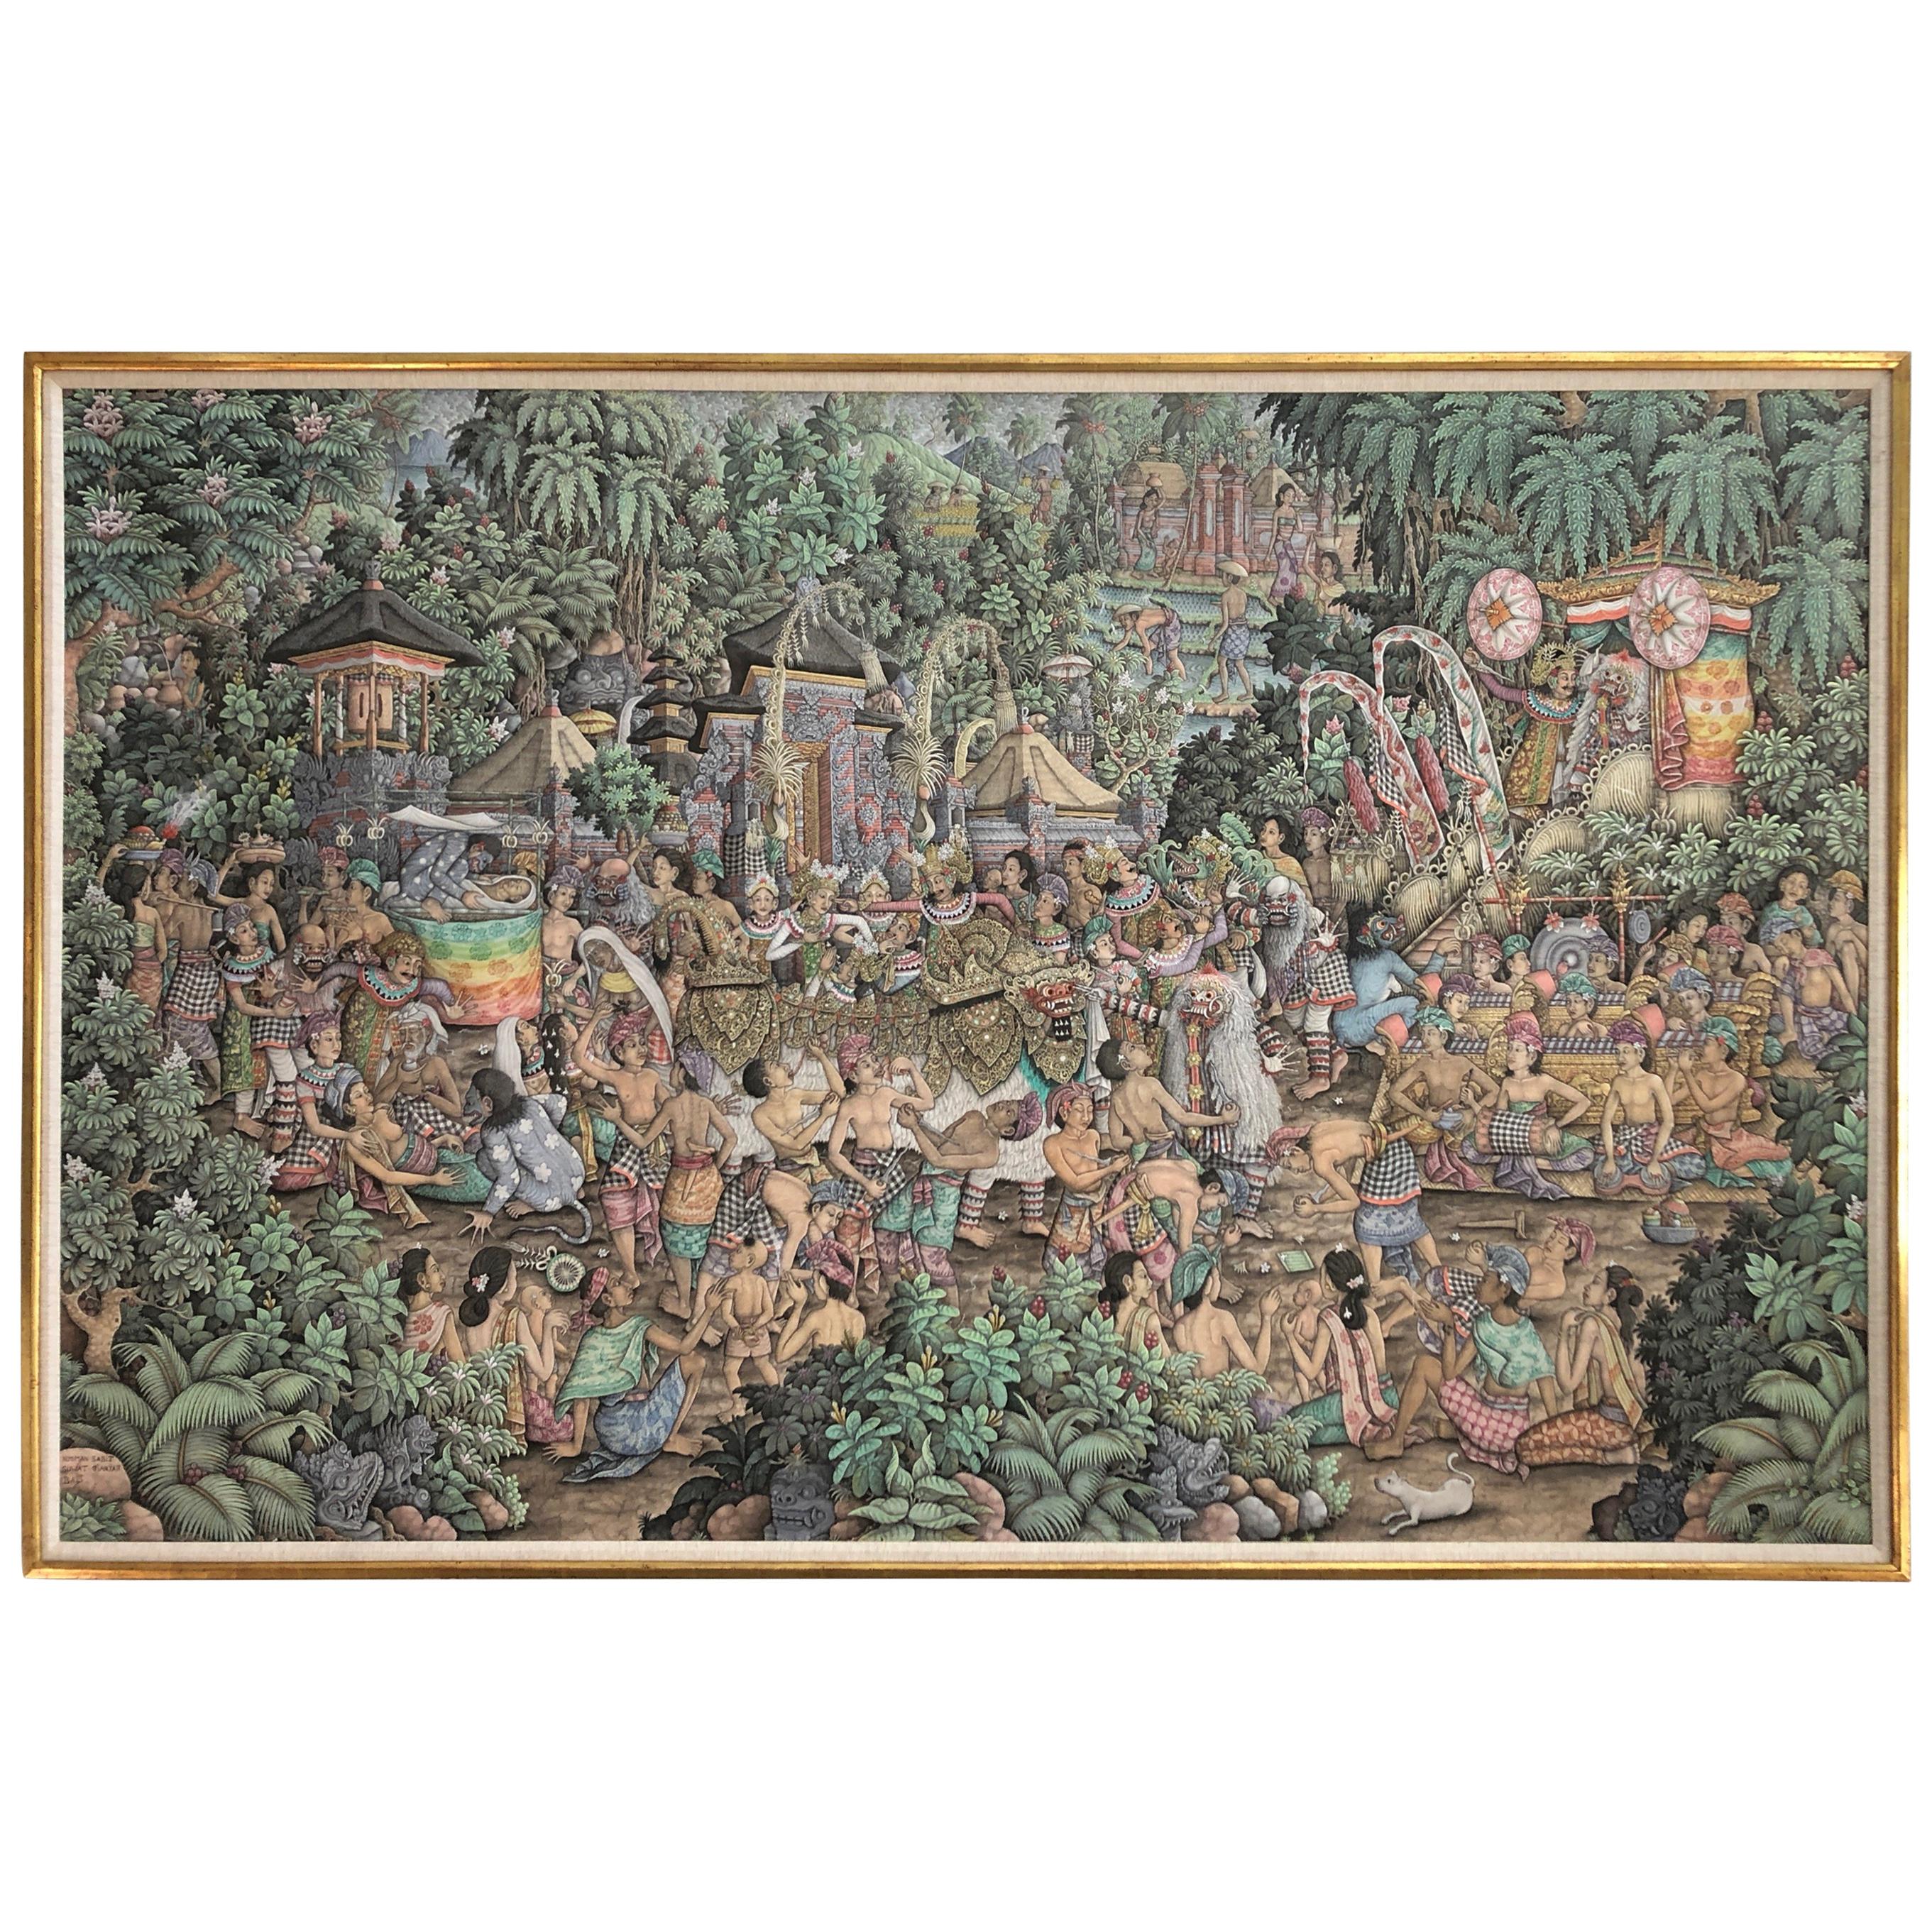 Monumental Spectacular Balinese Meticulously Detailed Painting